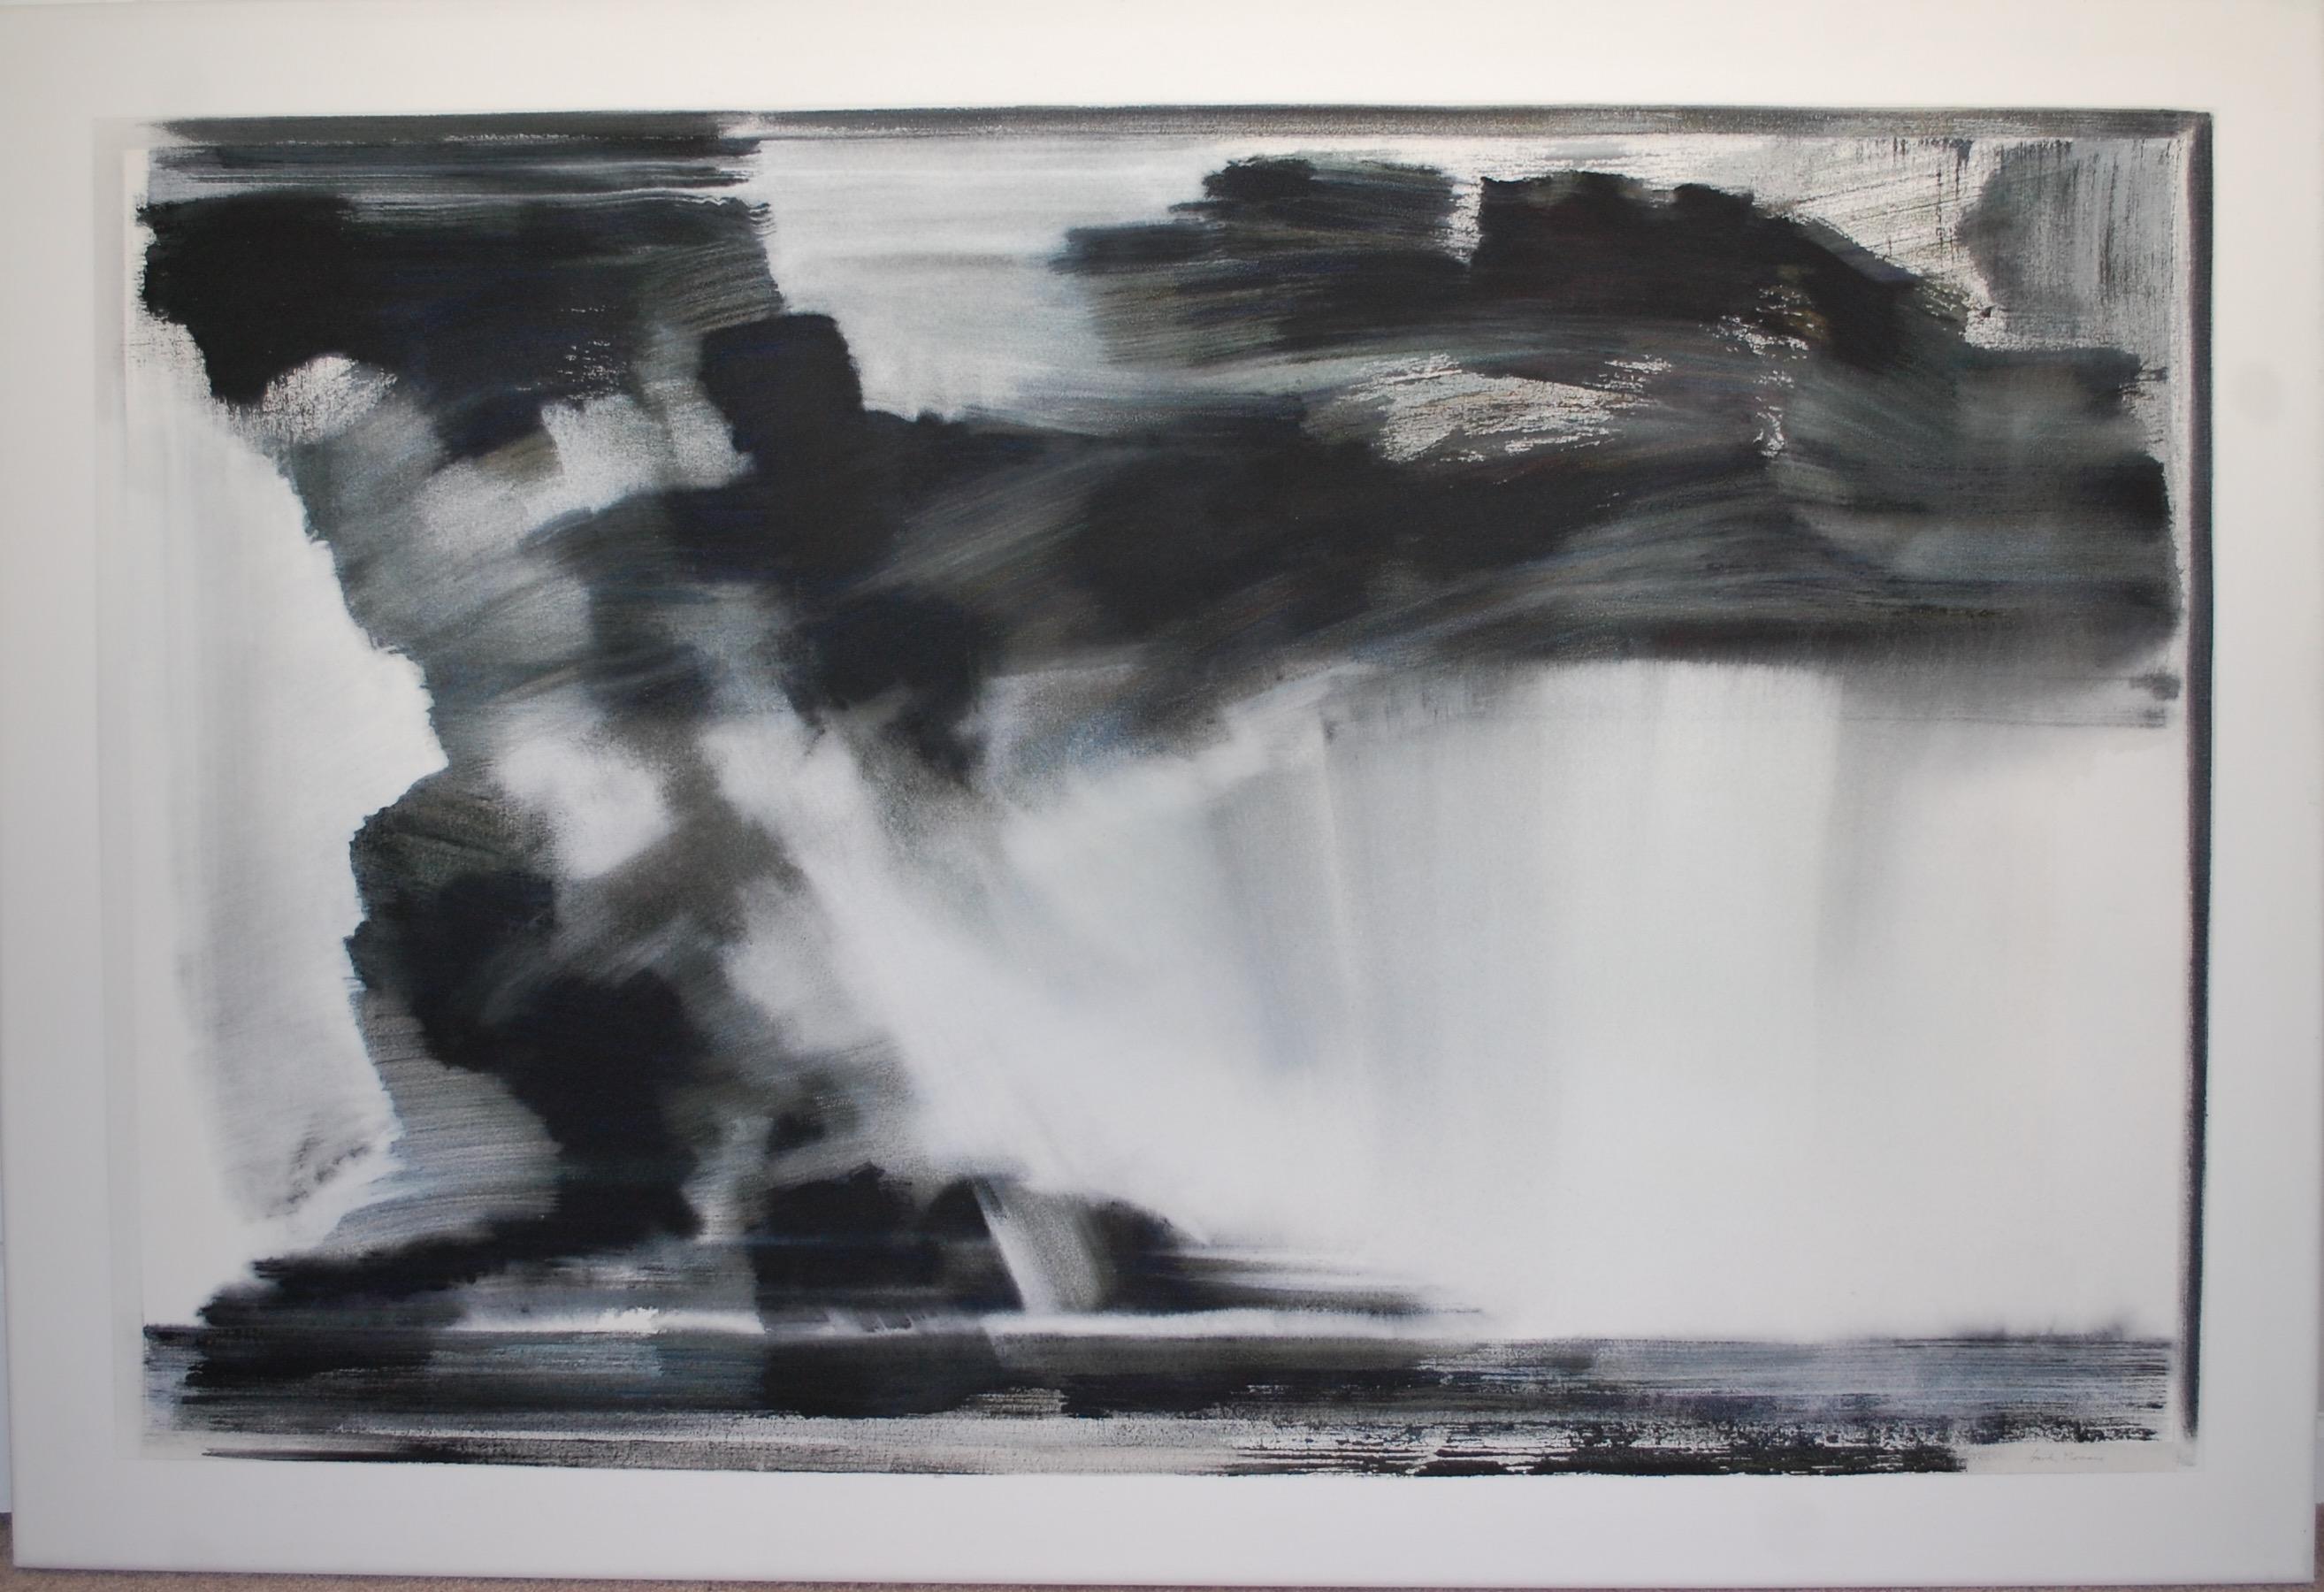 Before The Storm  Black And White Large Abstract Painting
Gallery wrap,  artist signed and titled.  Can be hang vertical or horizontal.
Frank Monaco.
Studied and worked with Marilyn Stiles of The Art Institute of Chicago/ Art History
Painting,